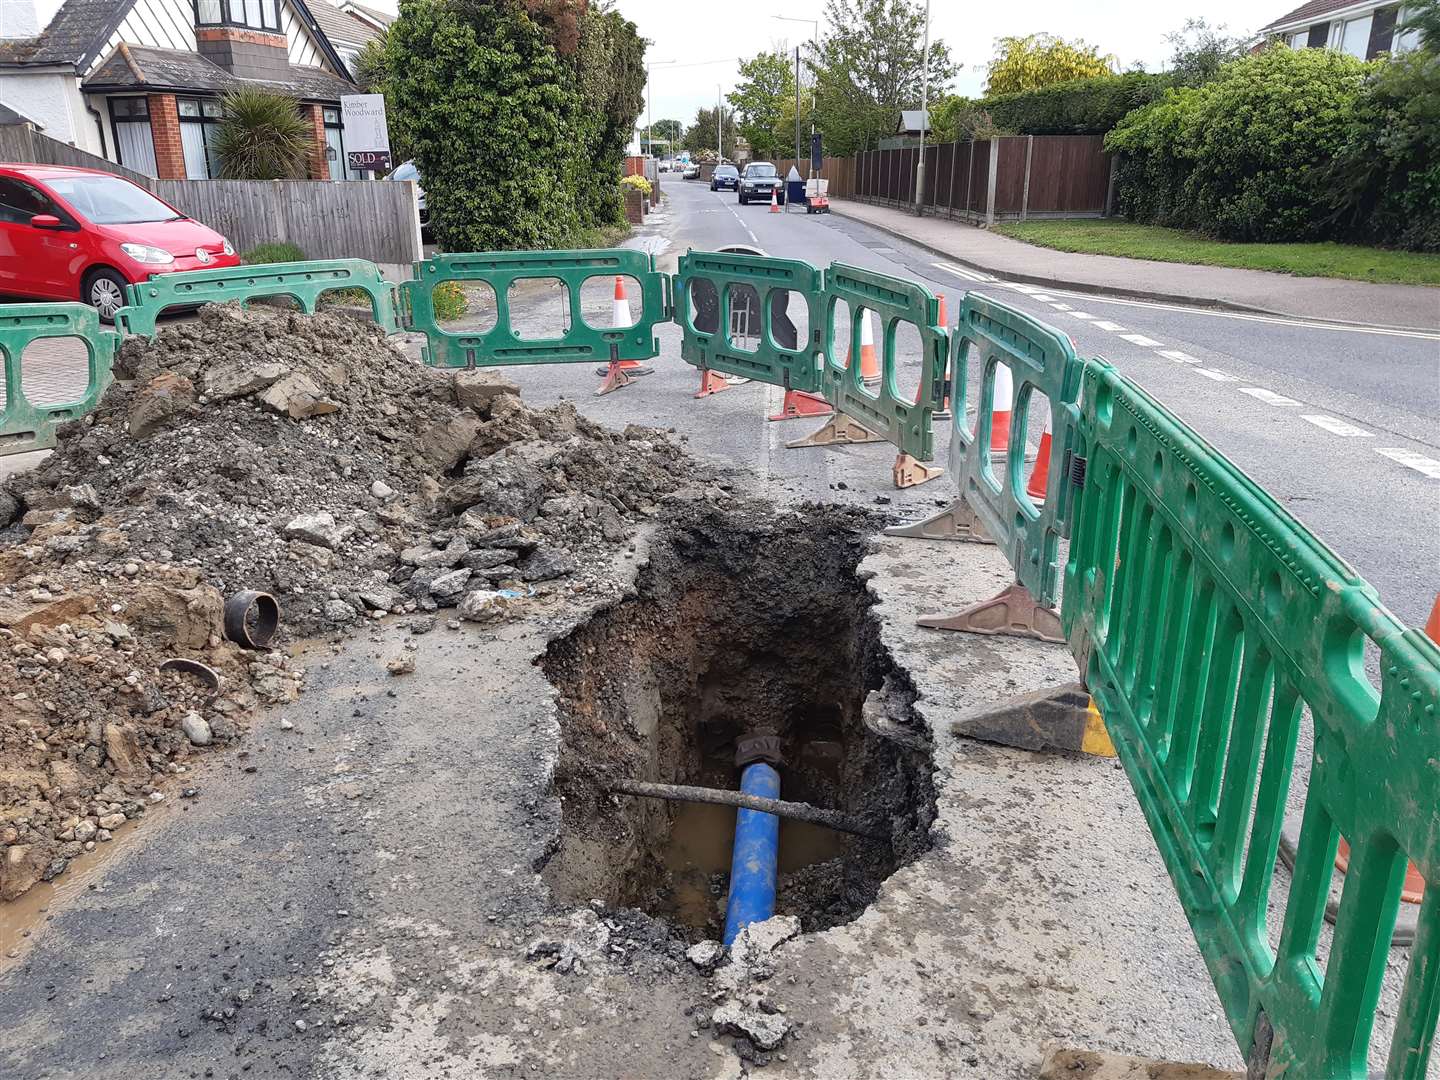 The first mains pipe burst in Reculver Road on Saturday